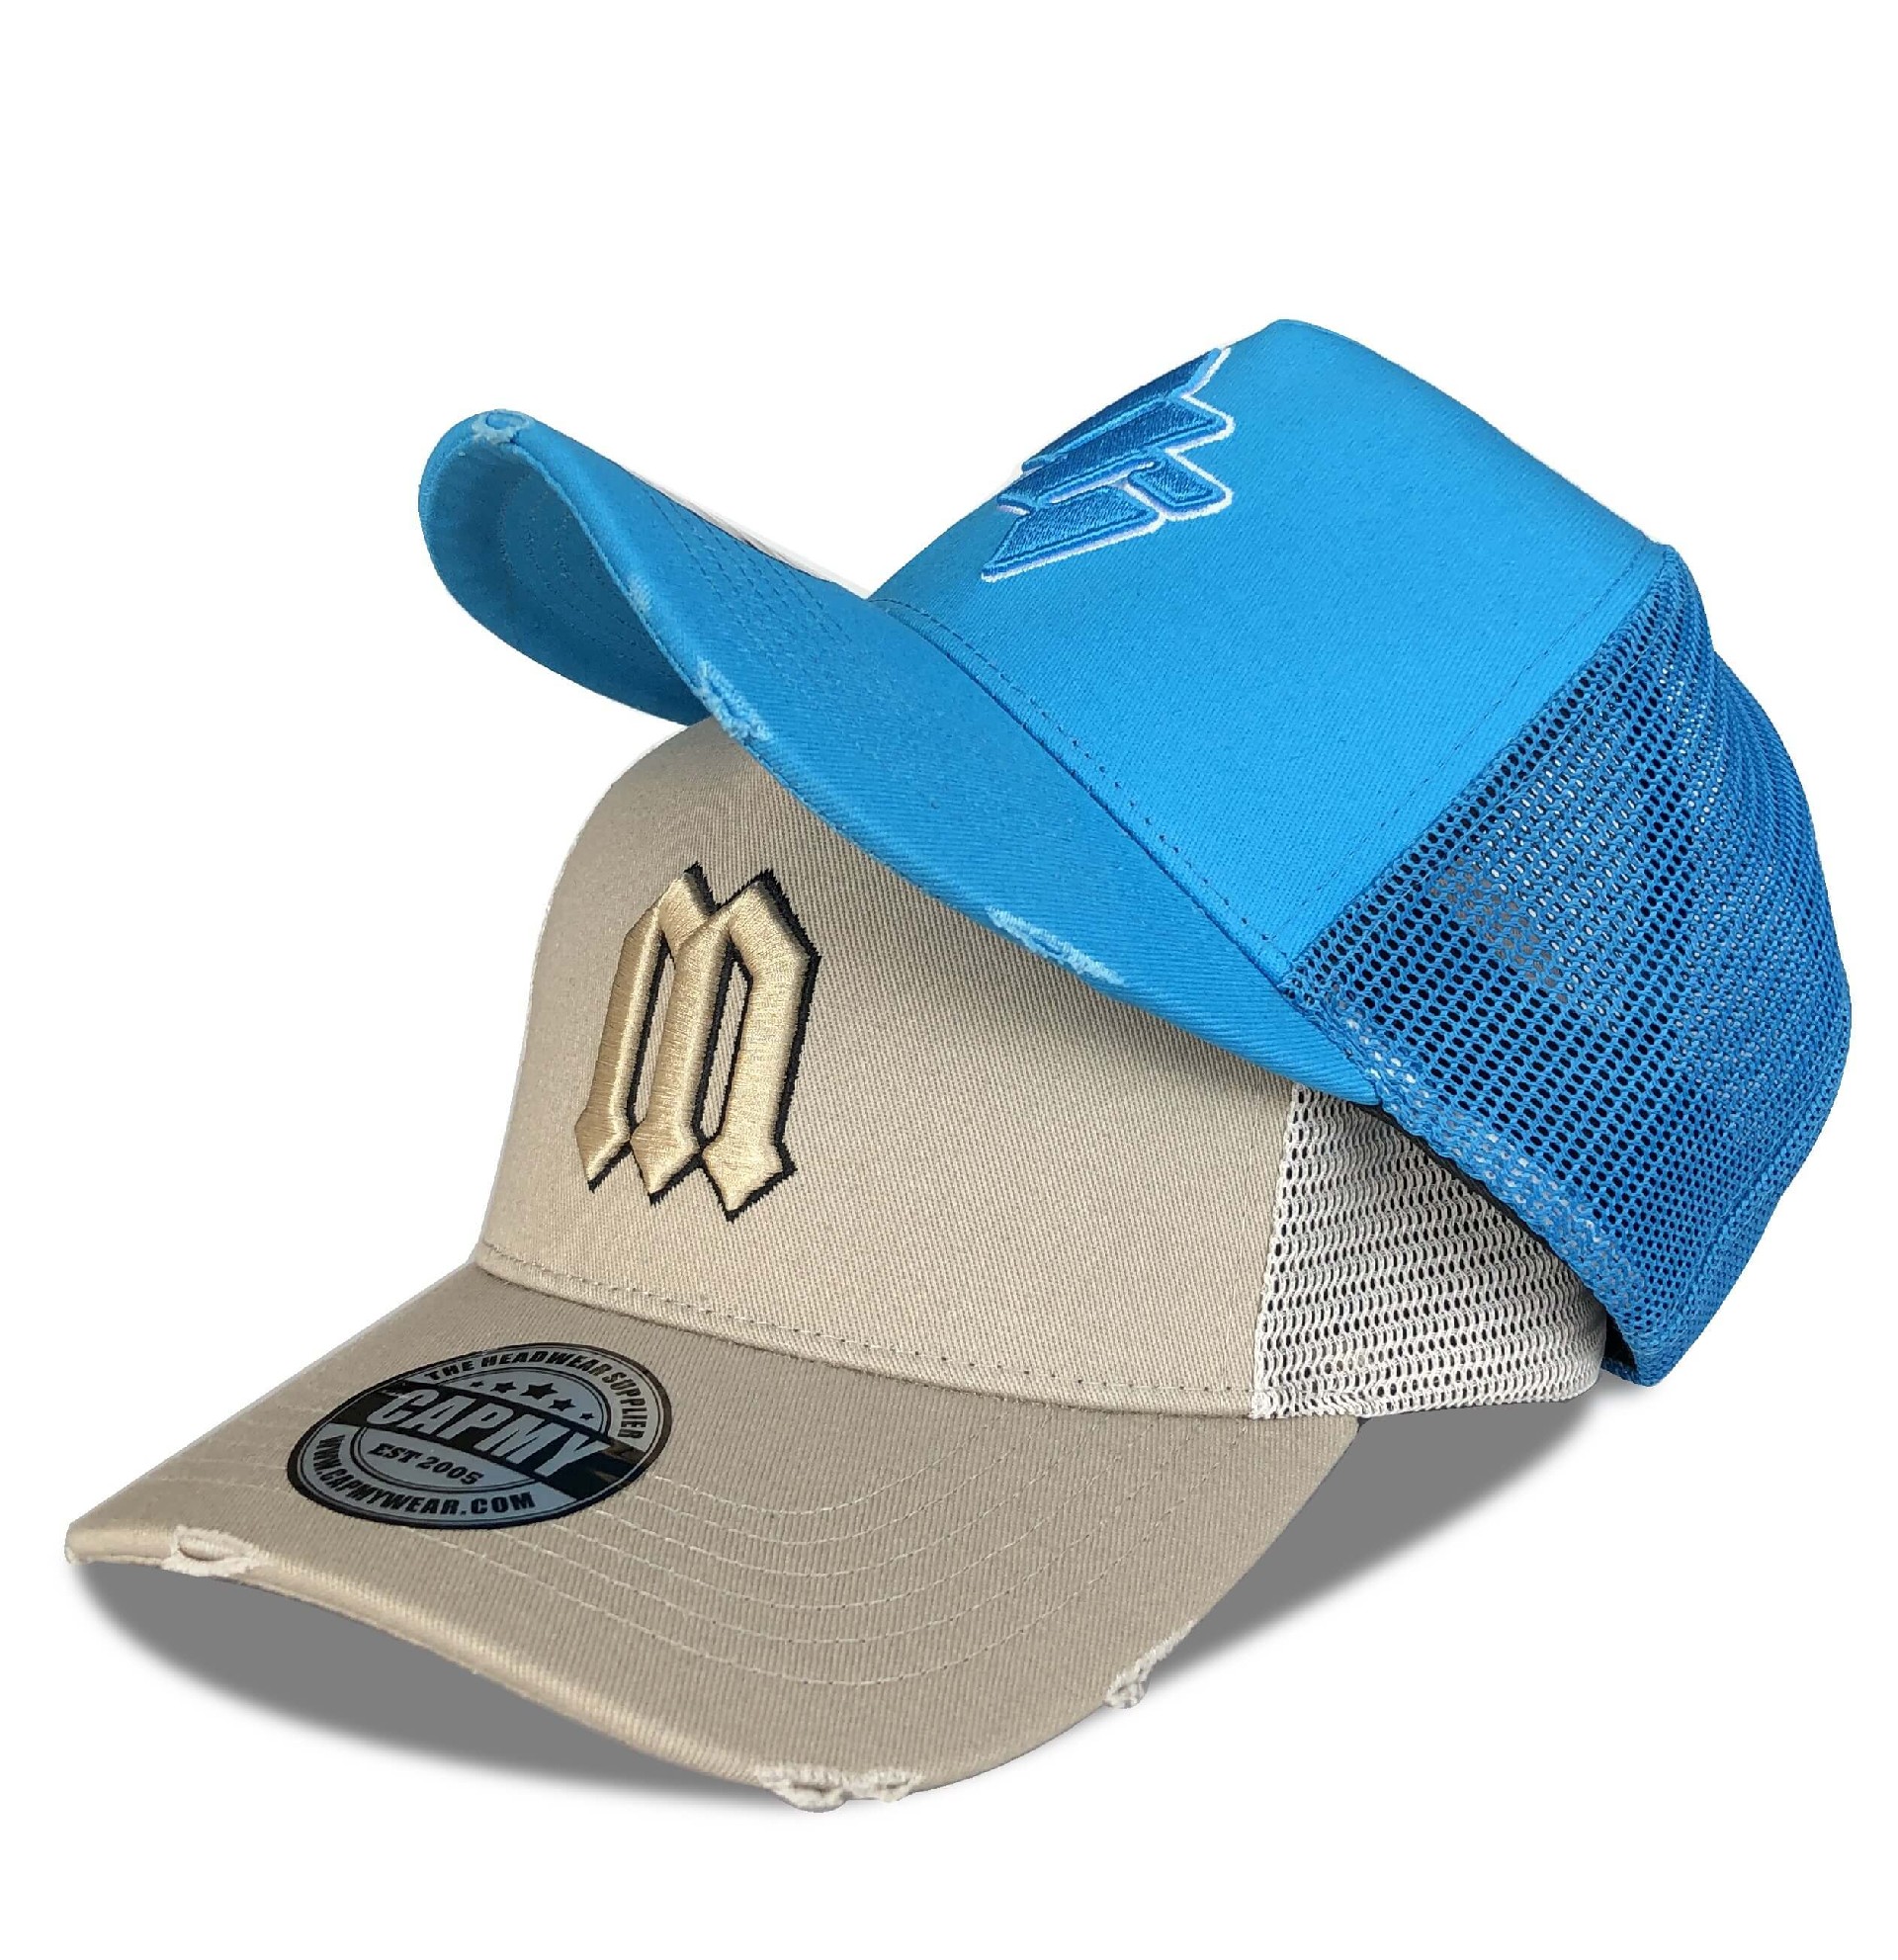 CMC-3121(Customized 5 Panel 3D Embroidery Baseball Hats Outdoor Sports Distressed Rip Vintage Trucker Hats Factory)